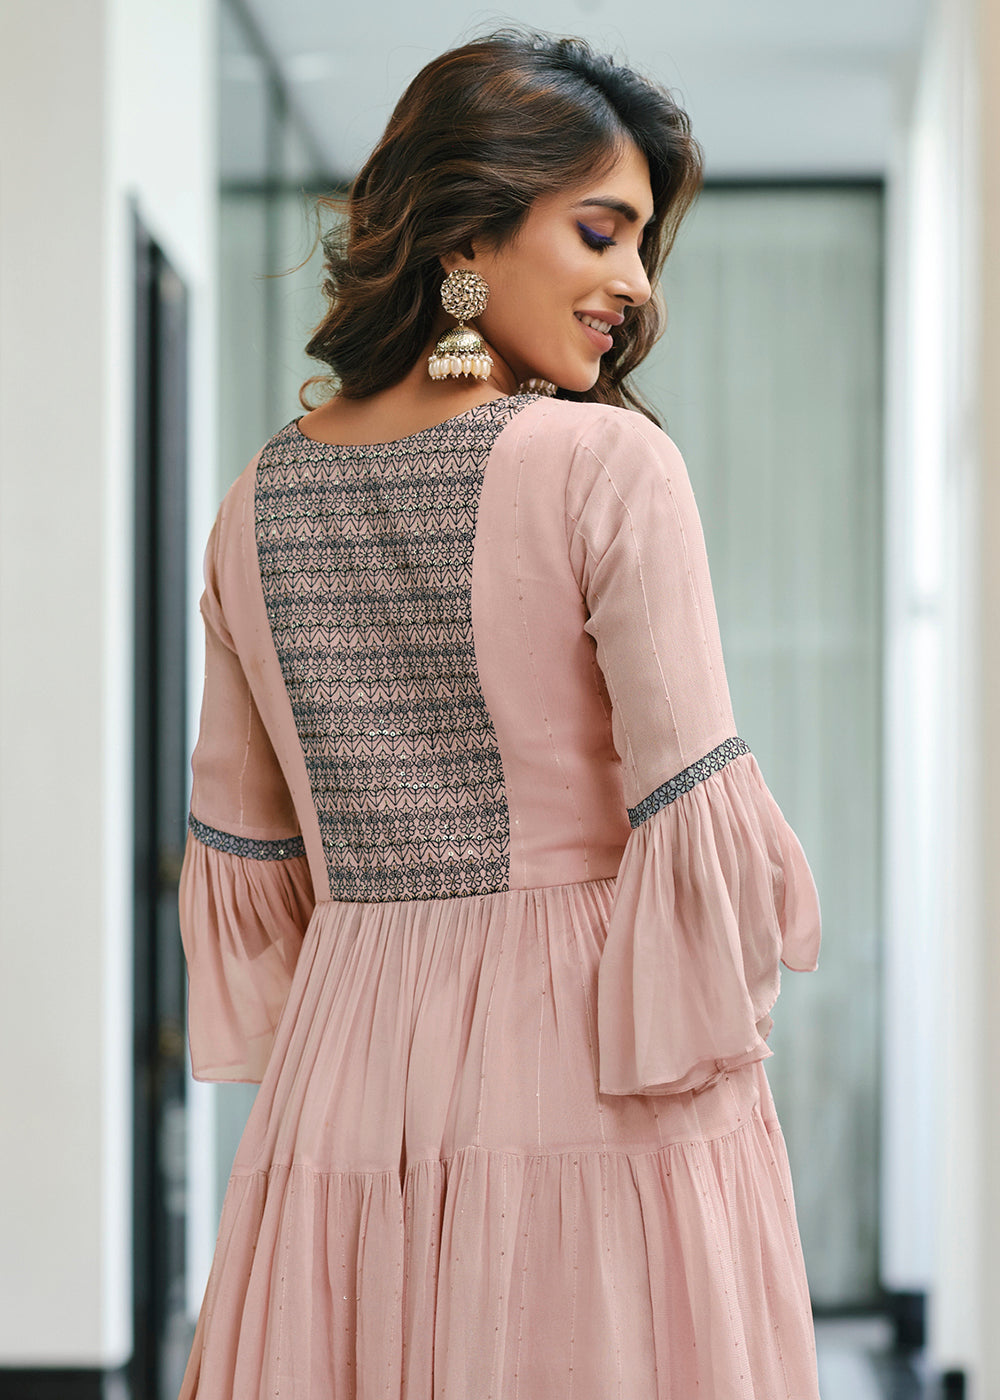 Buy Now Admirable Mauve Pink Party Festive Palazzo Salwar Suit Online in USA, UK, Canada, Germany & Worldwide at Empress Clothing. 